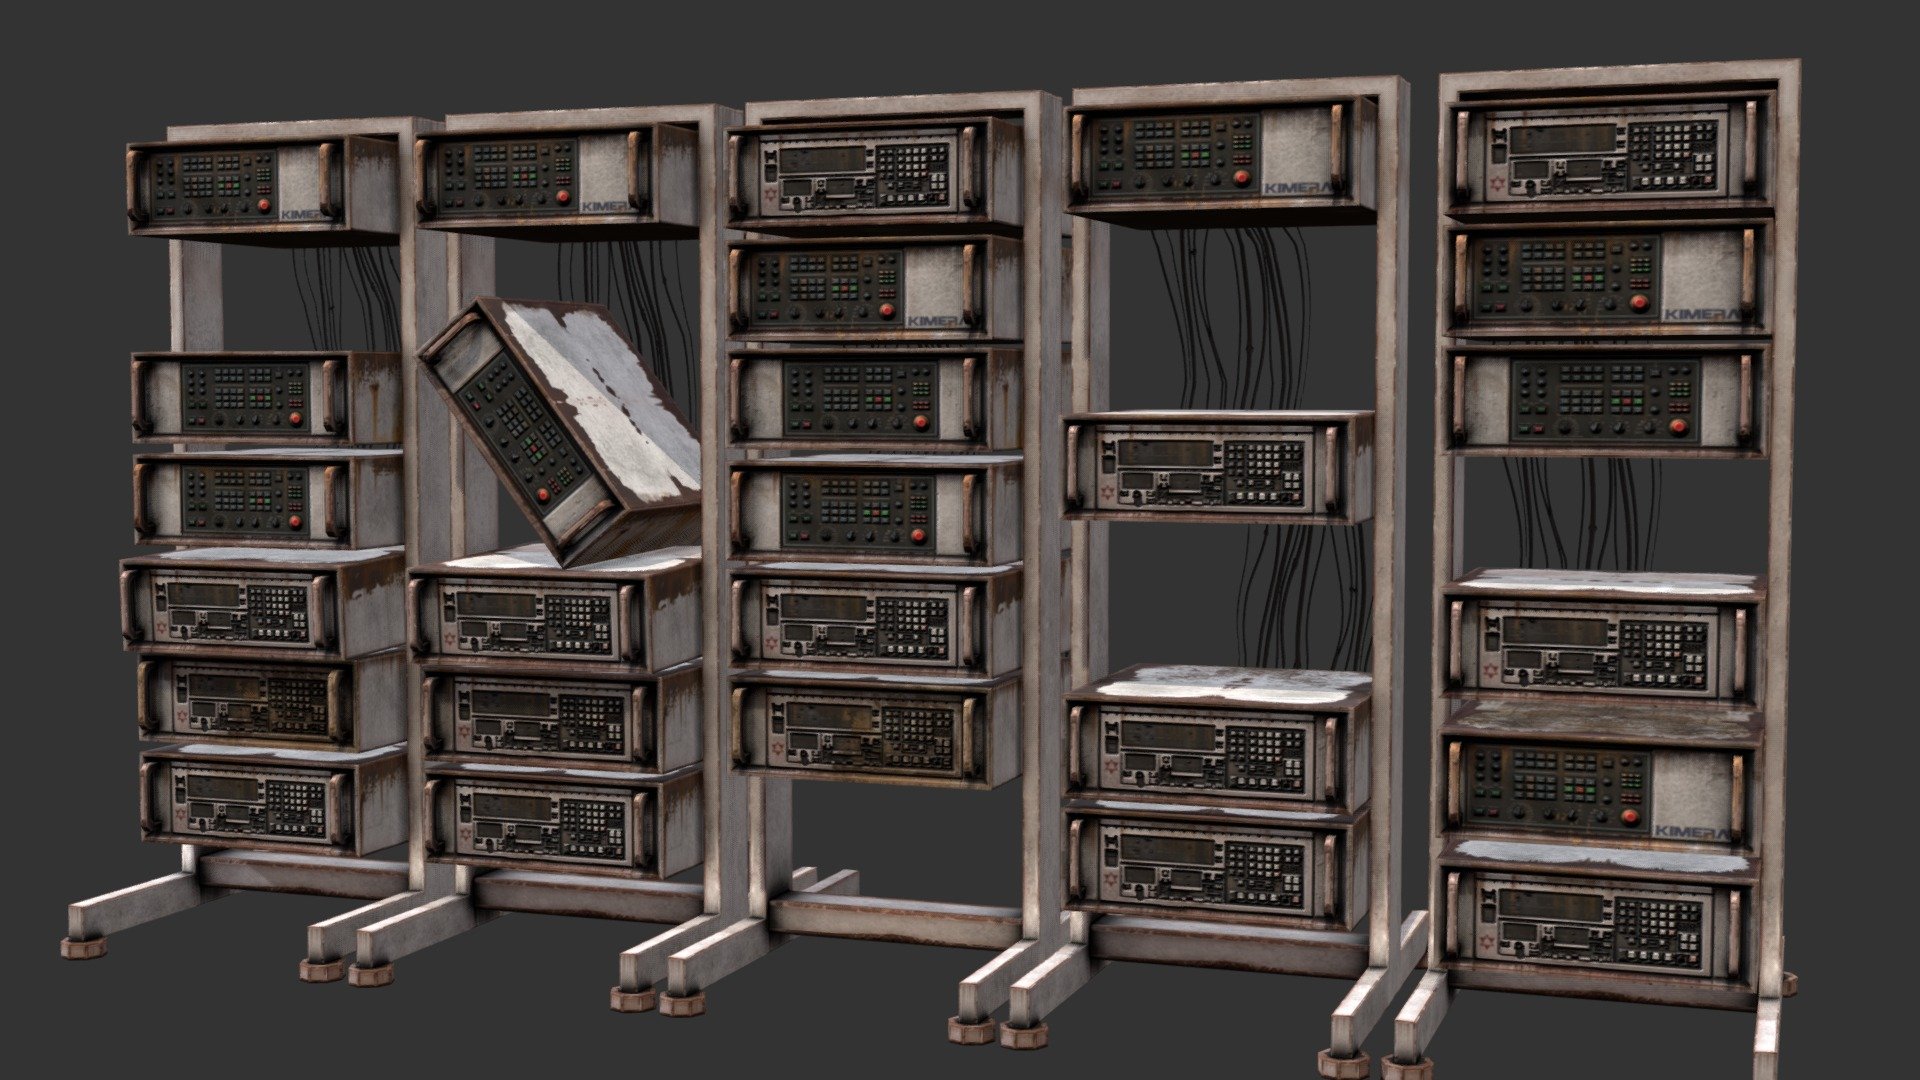 A simple prop made for a personal project. It's a rack of ruined machinery left out in the elements.

Made in 3DSMax, textured in Substance 3d model